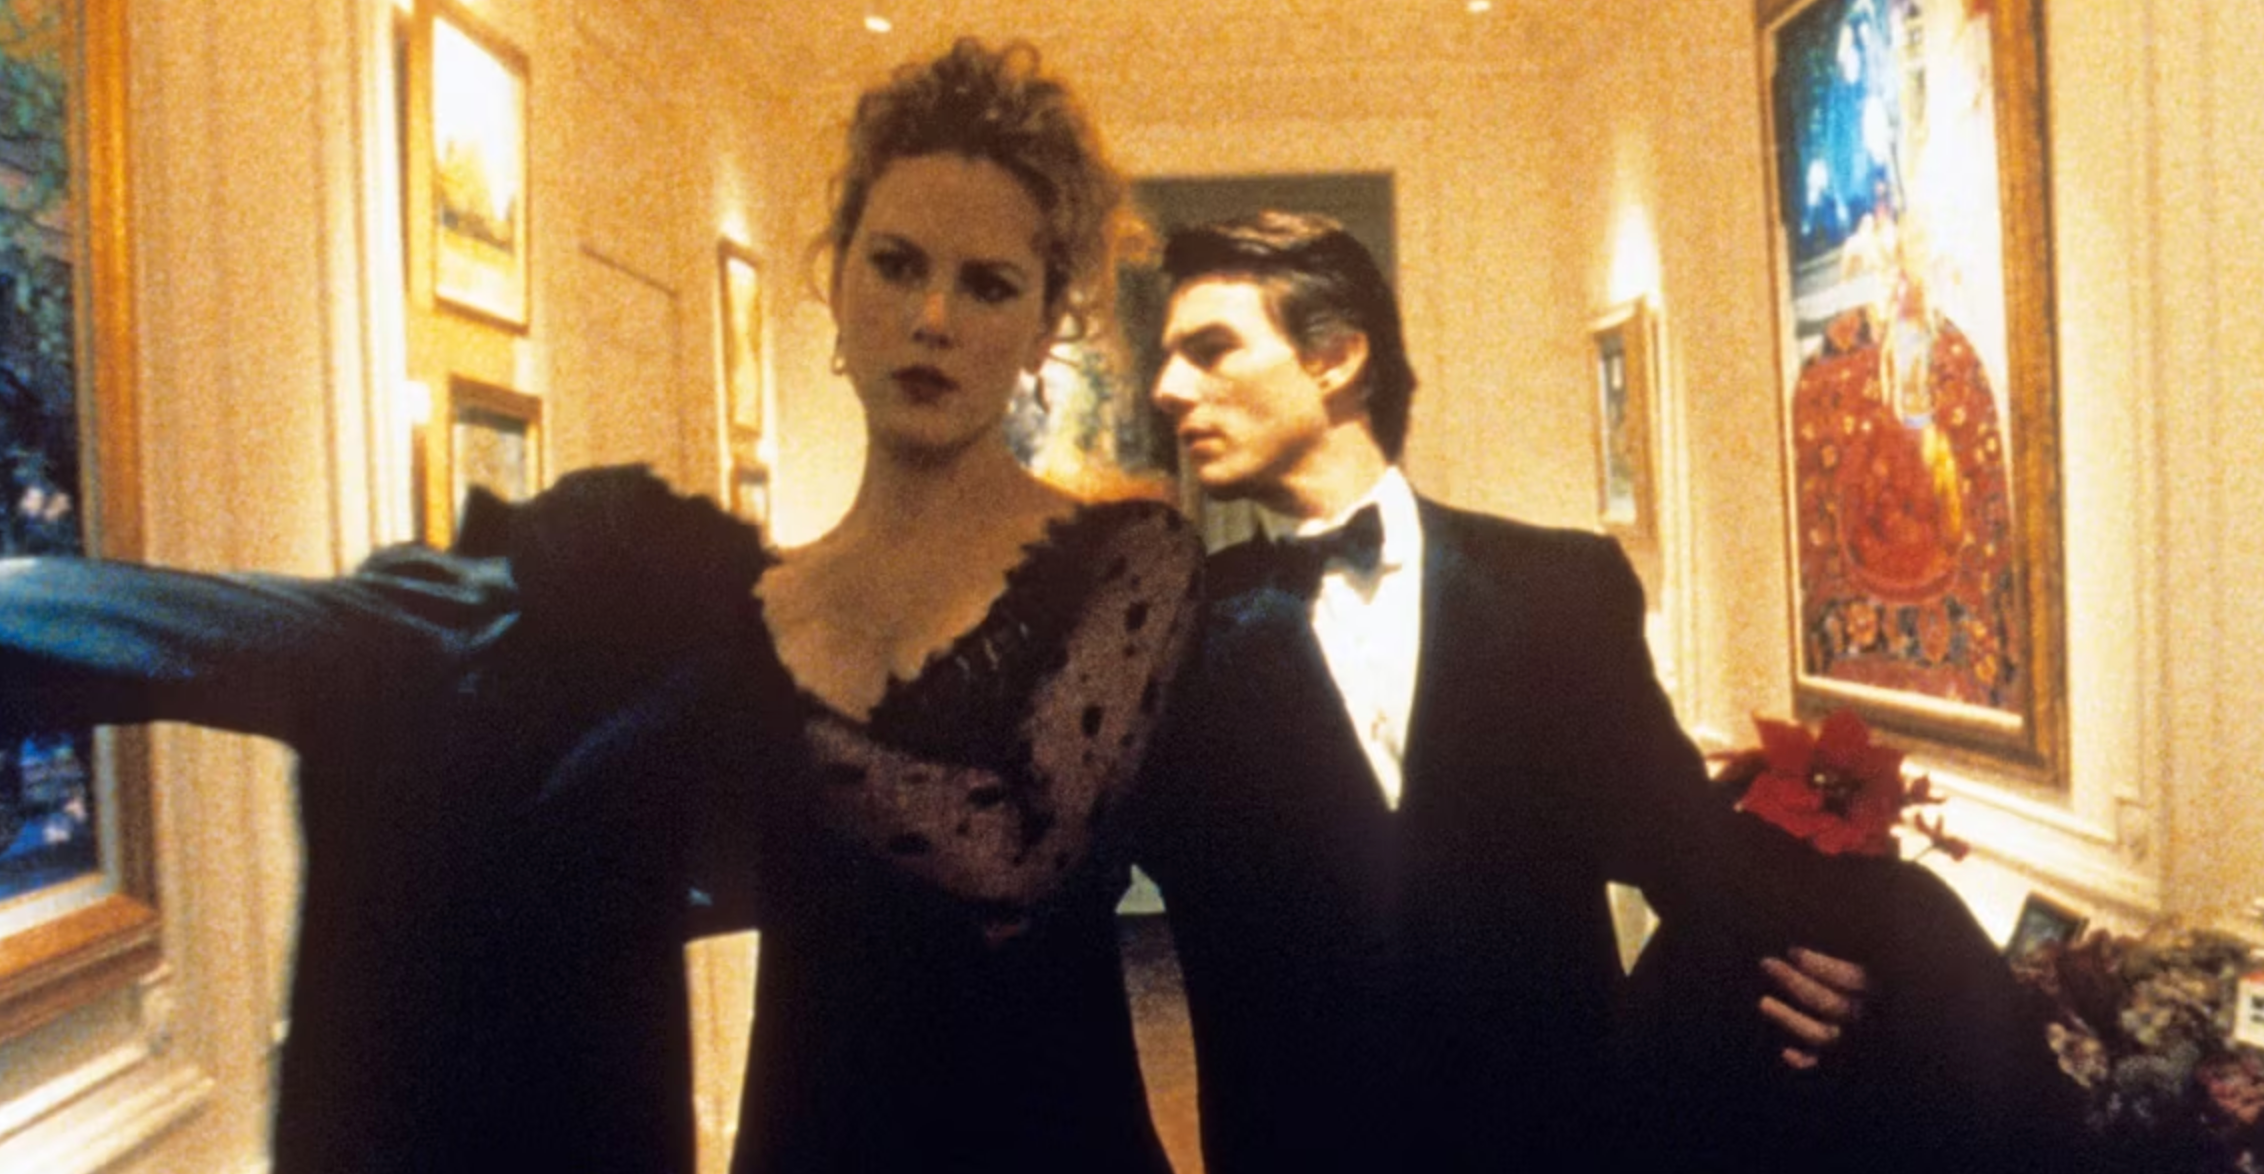 Kubrick's Eyes Wide Shut is one of the only times on film you'll see Cruise at his actual height. Photo Credit: TheThings